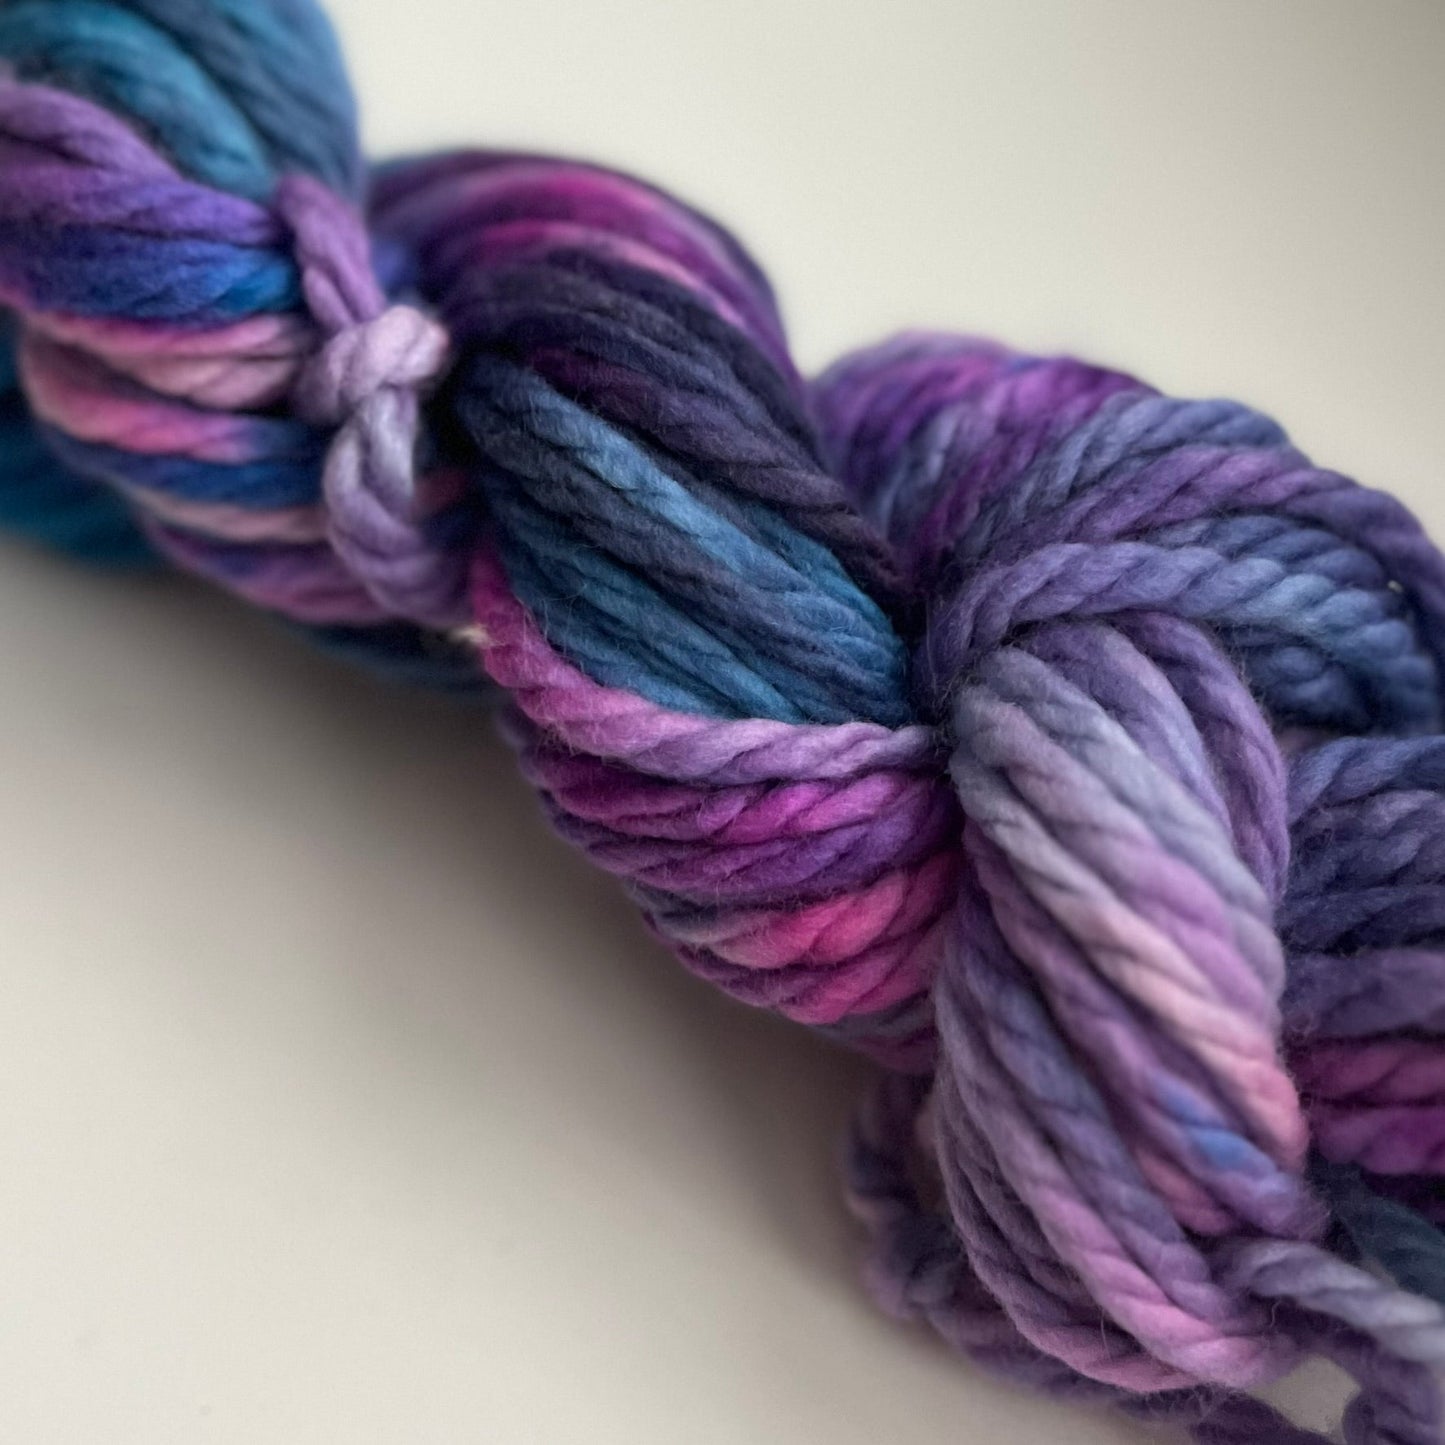 Summer Camp Fibers - Camp Super Bulky Hand Dyed Yarn - Violets are Blue